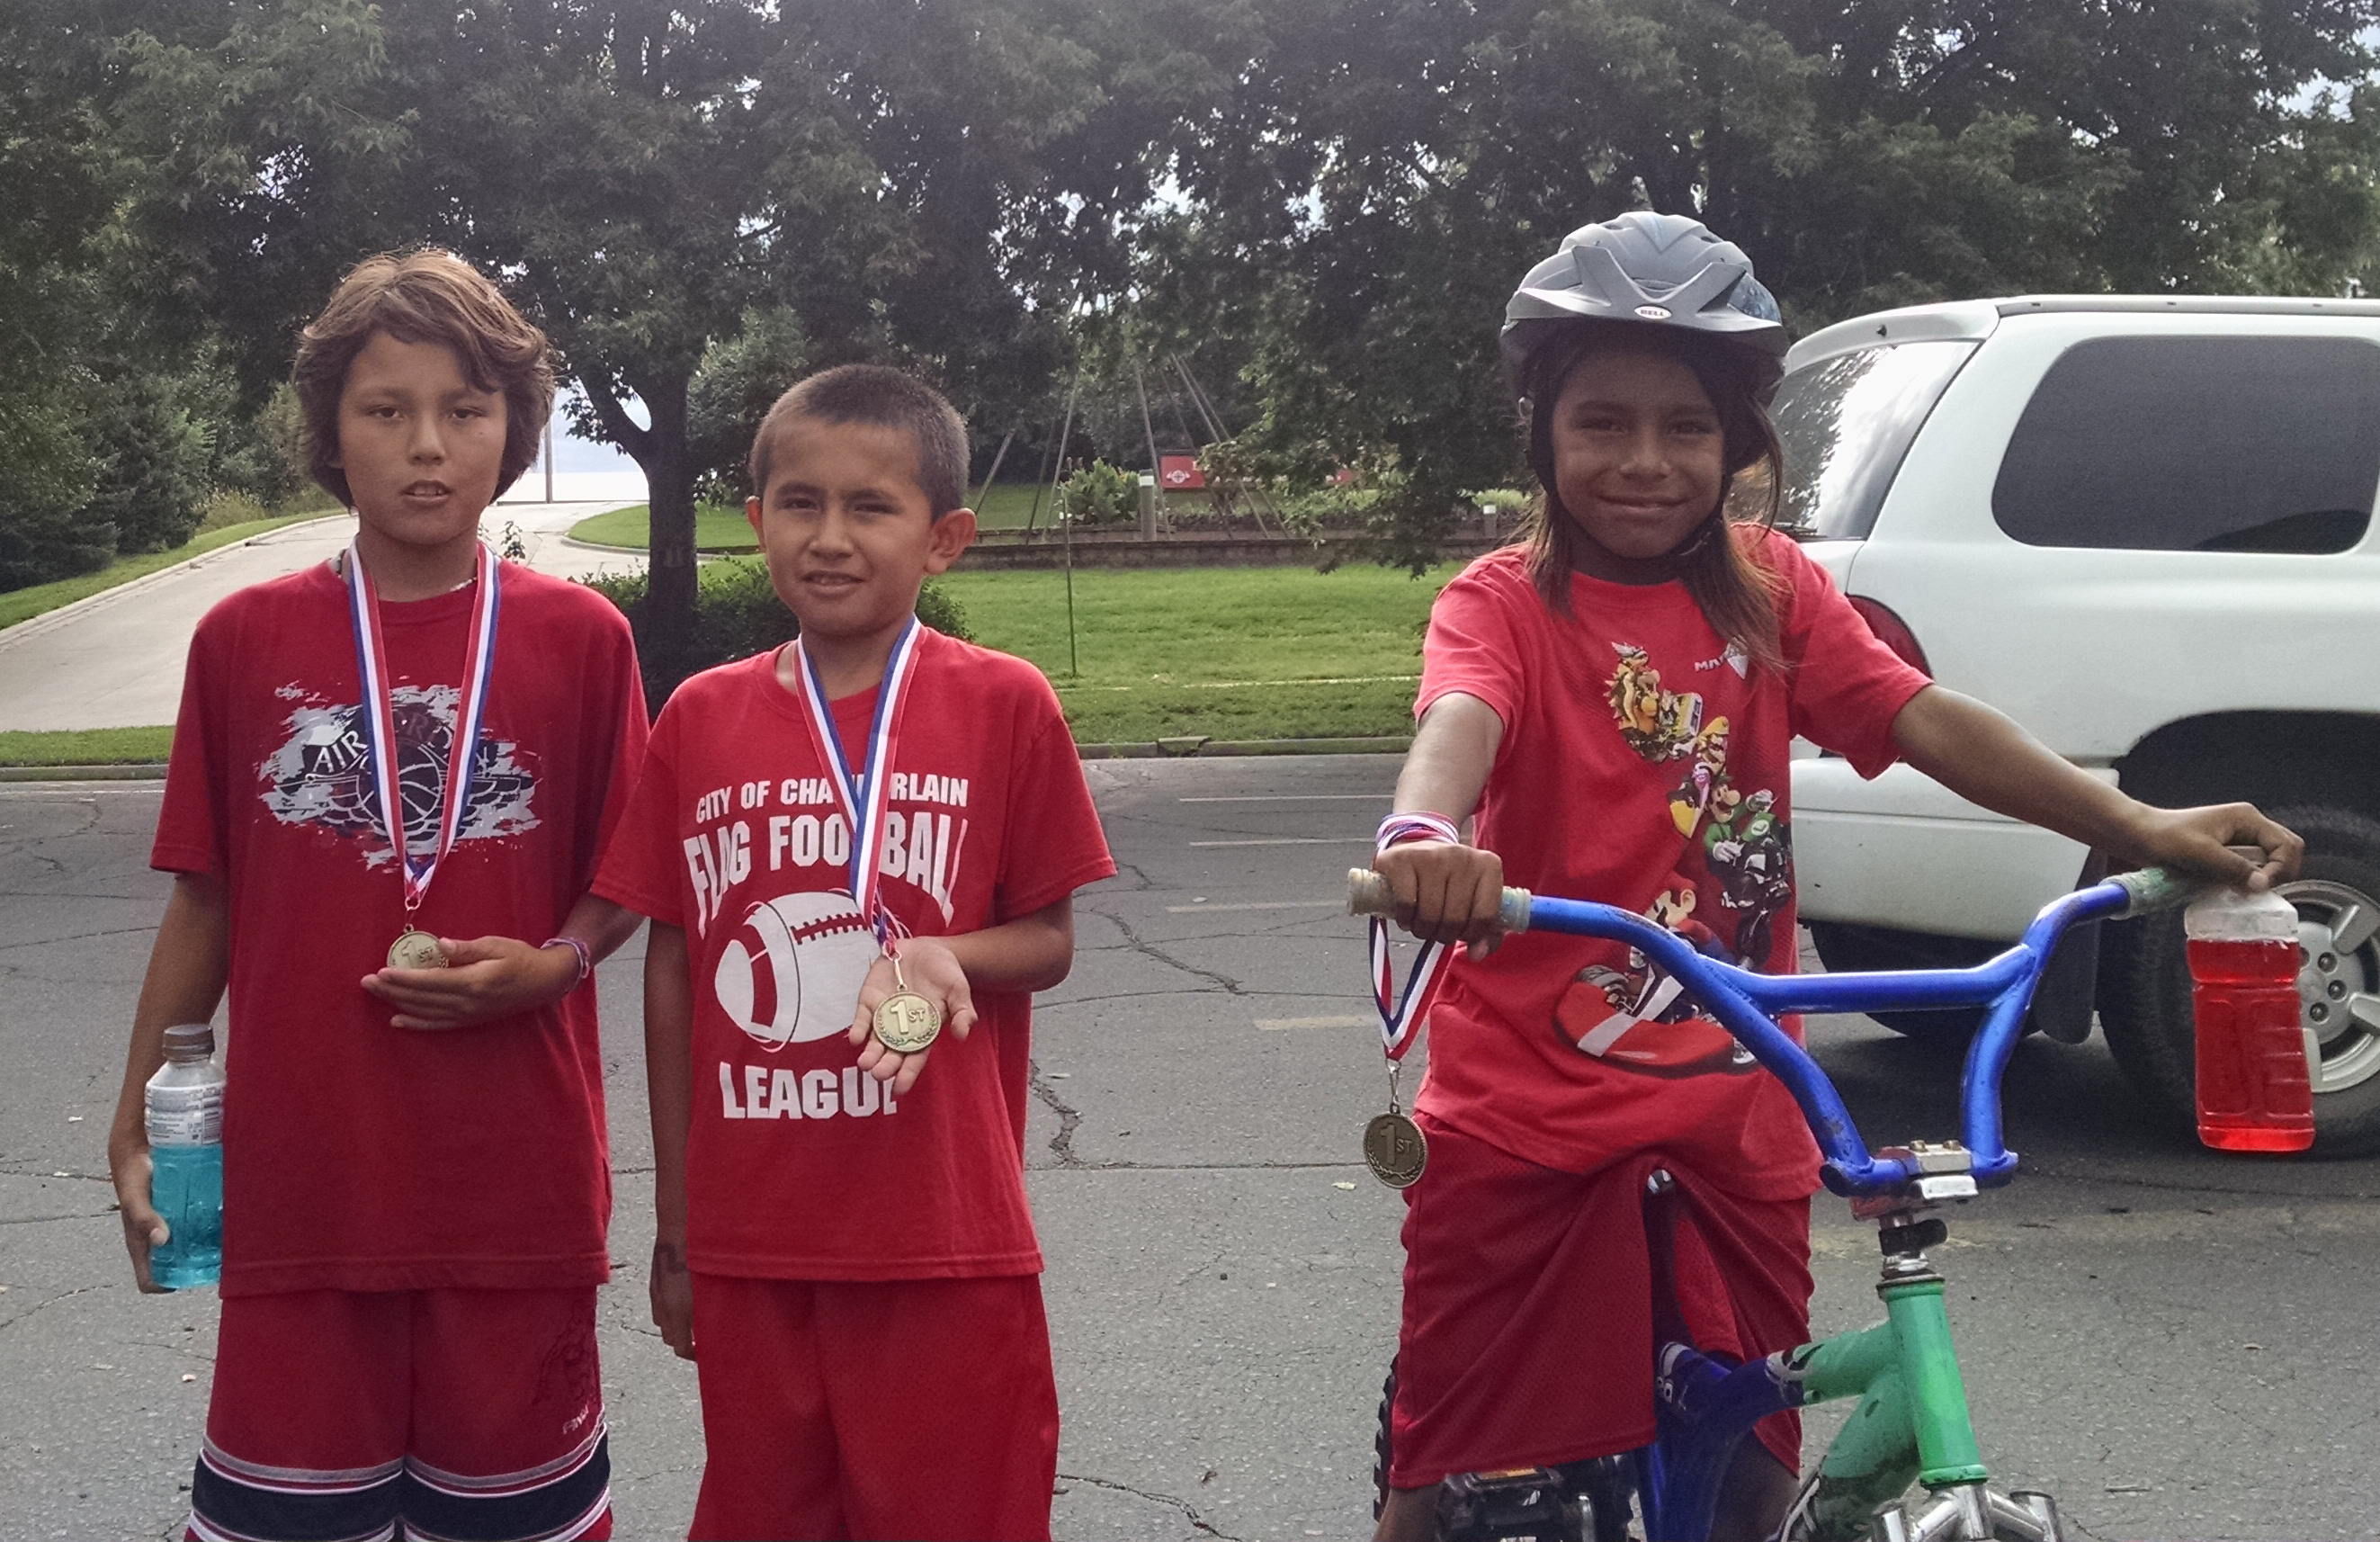 The Lakota children competed in a youth triathlon and did great! 